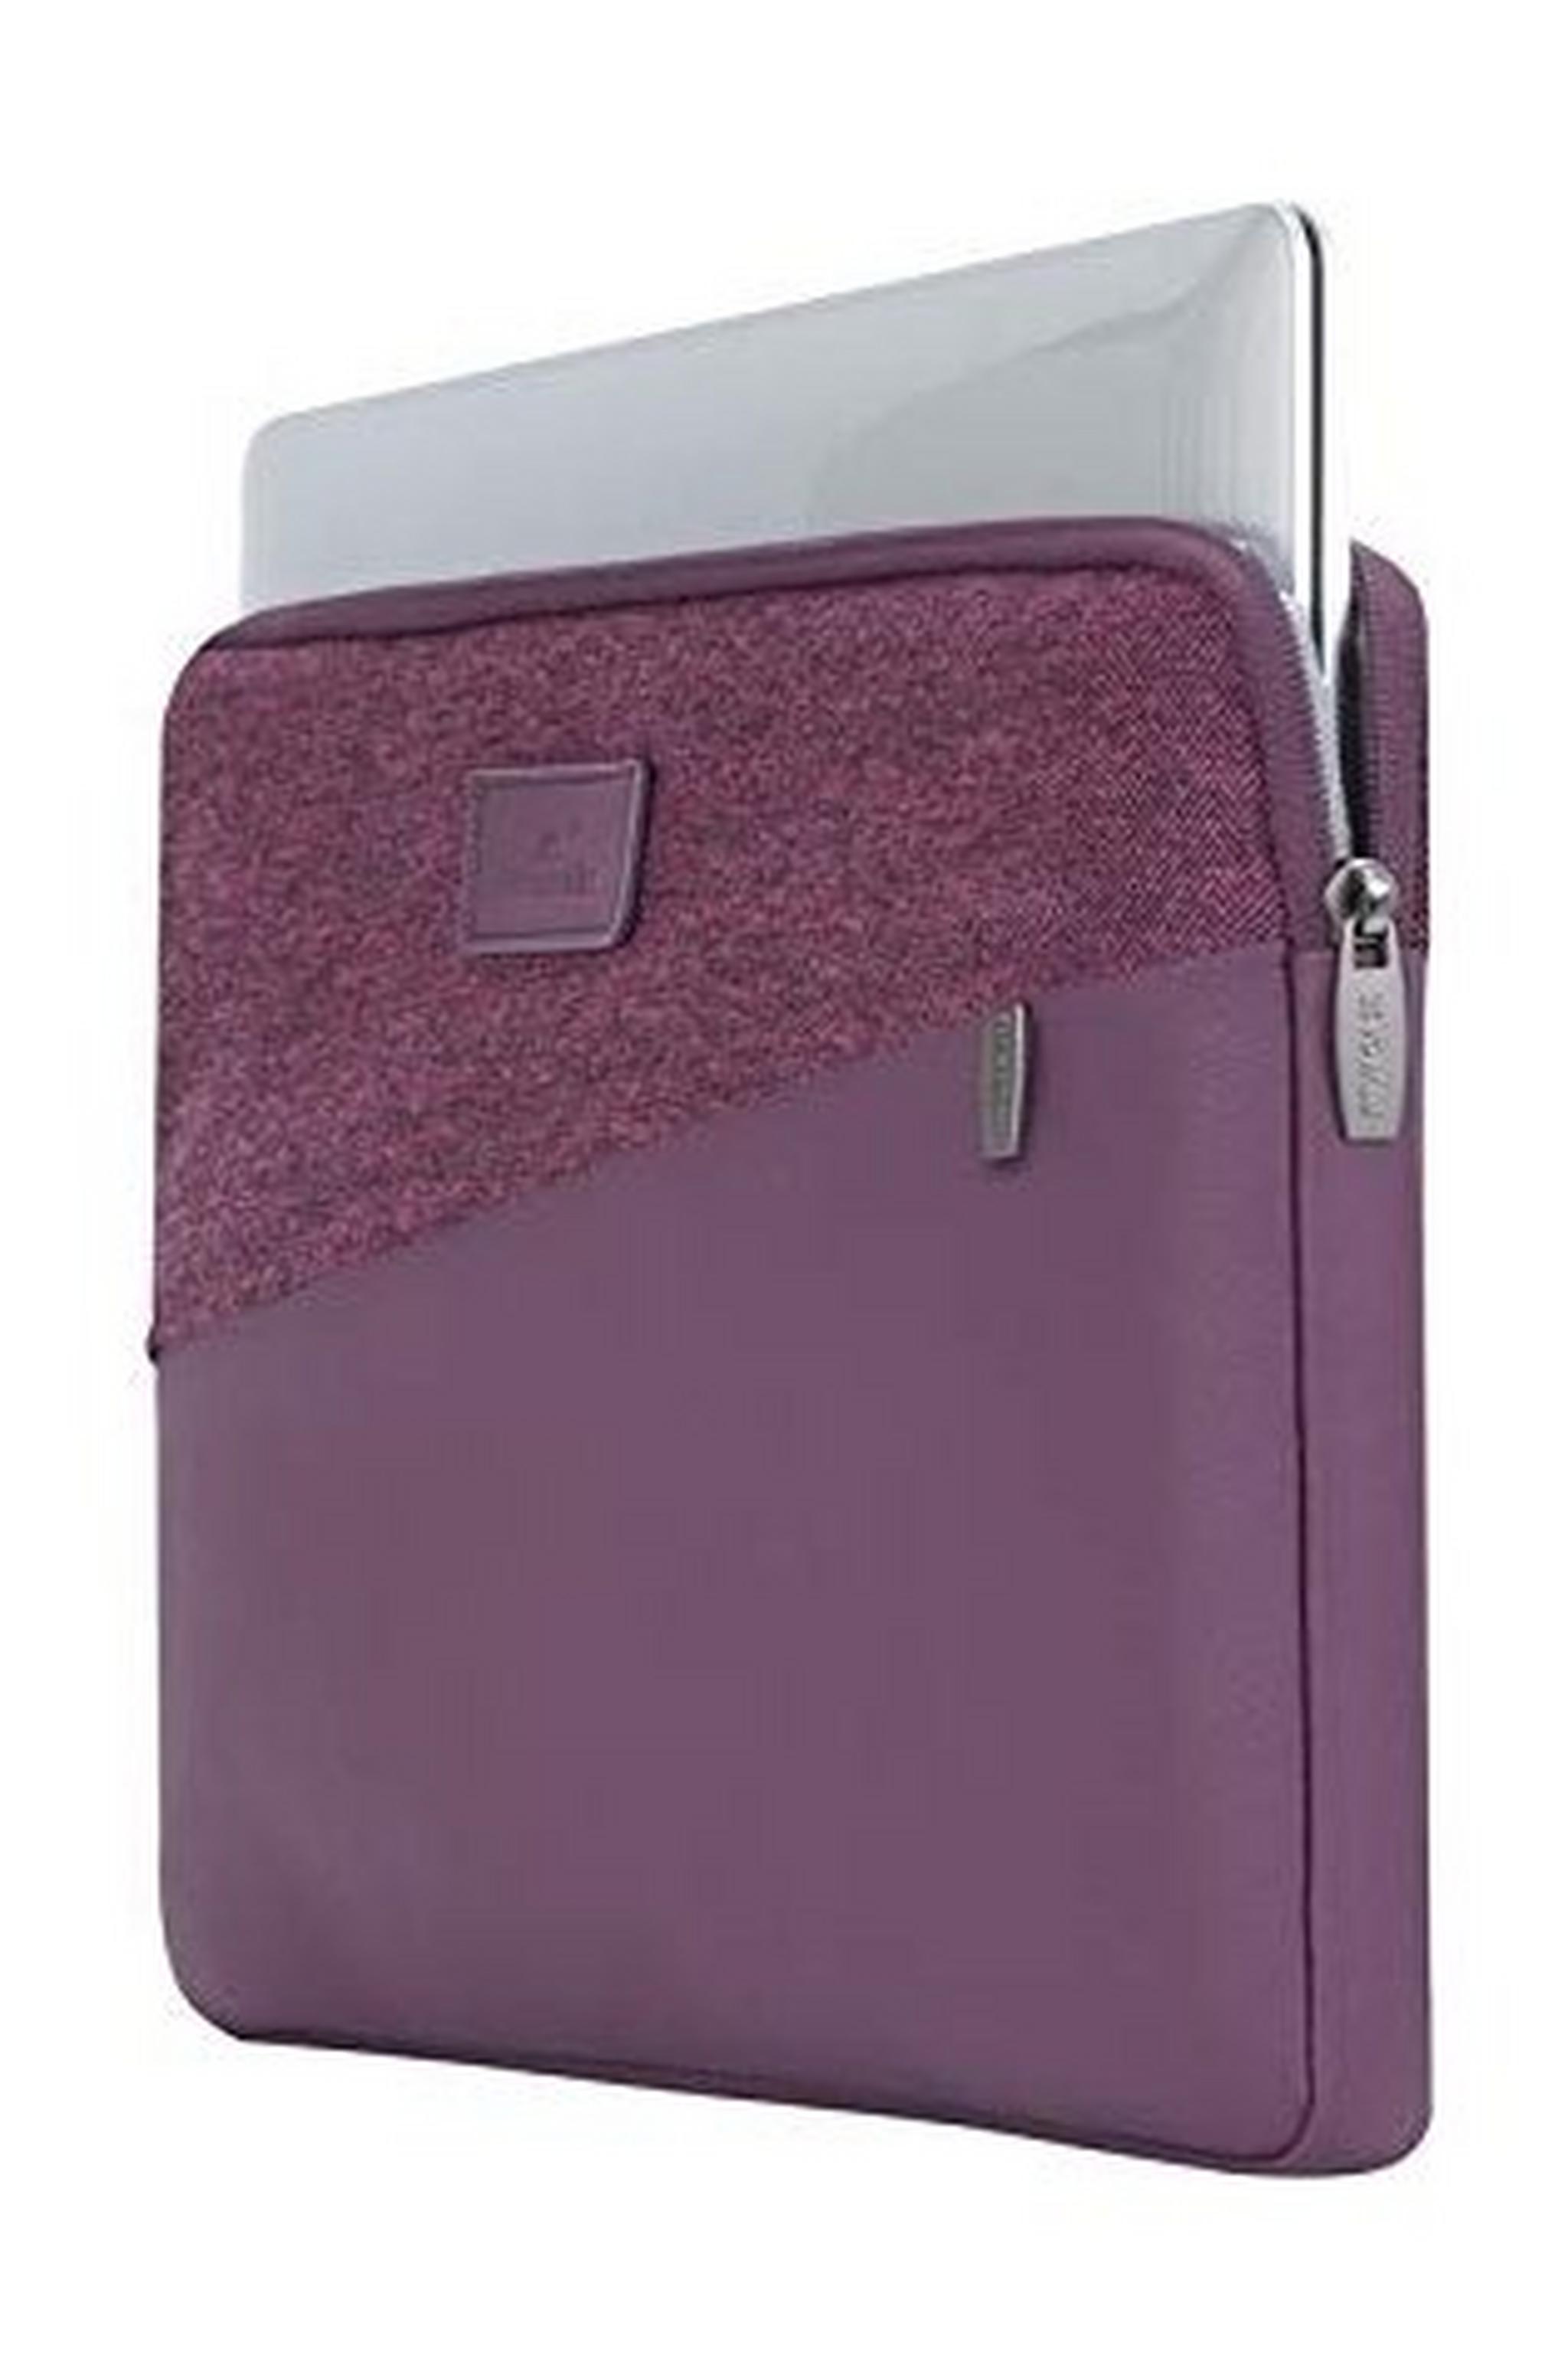 Rivacase 13.3 Sleeve for Ipad & Macbook (7903) - Red